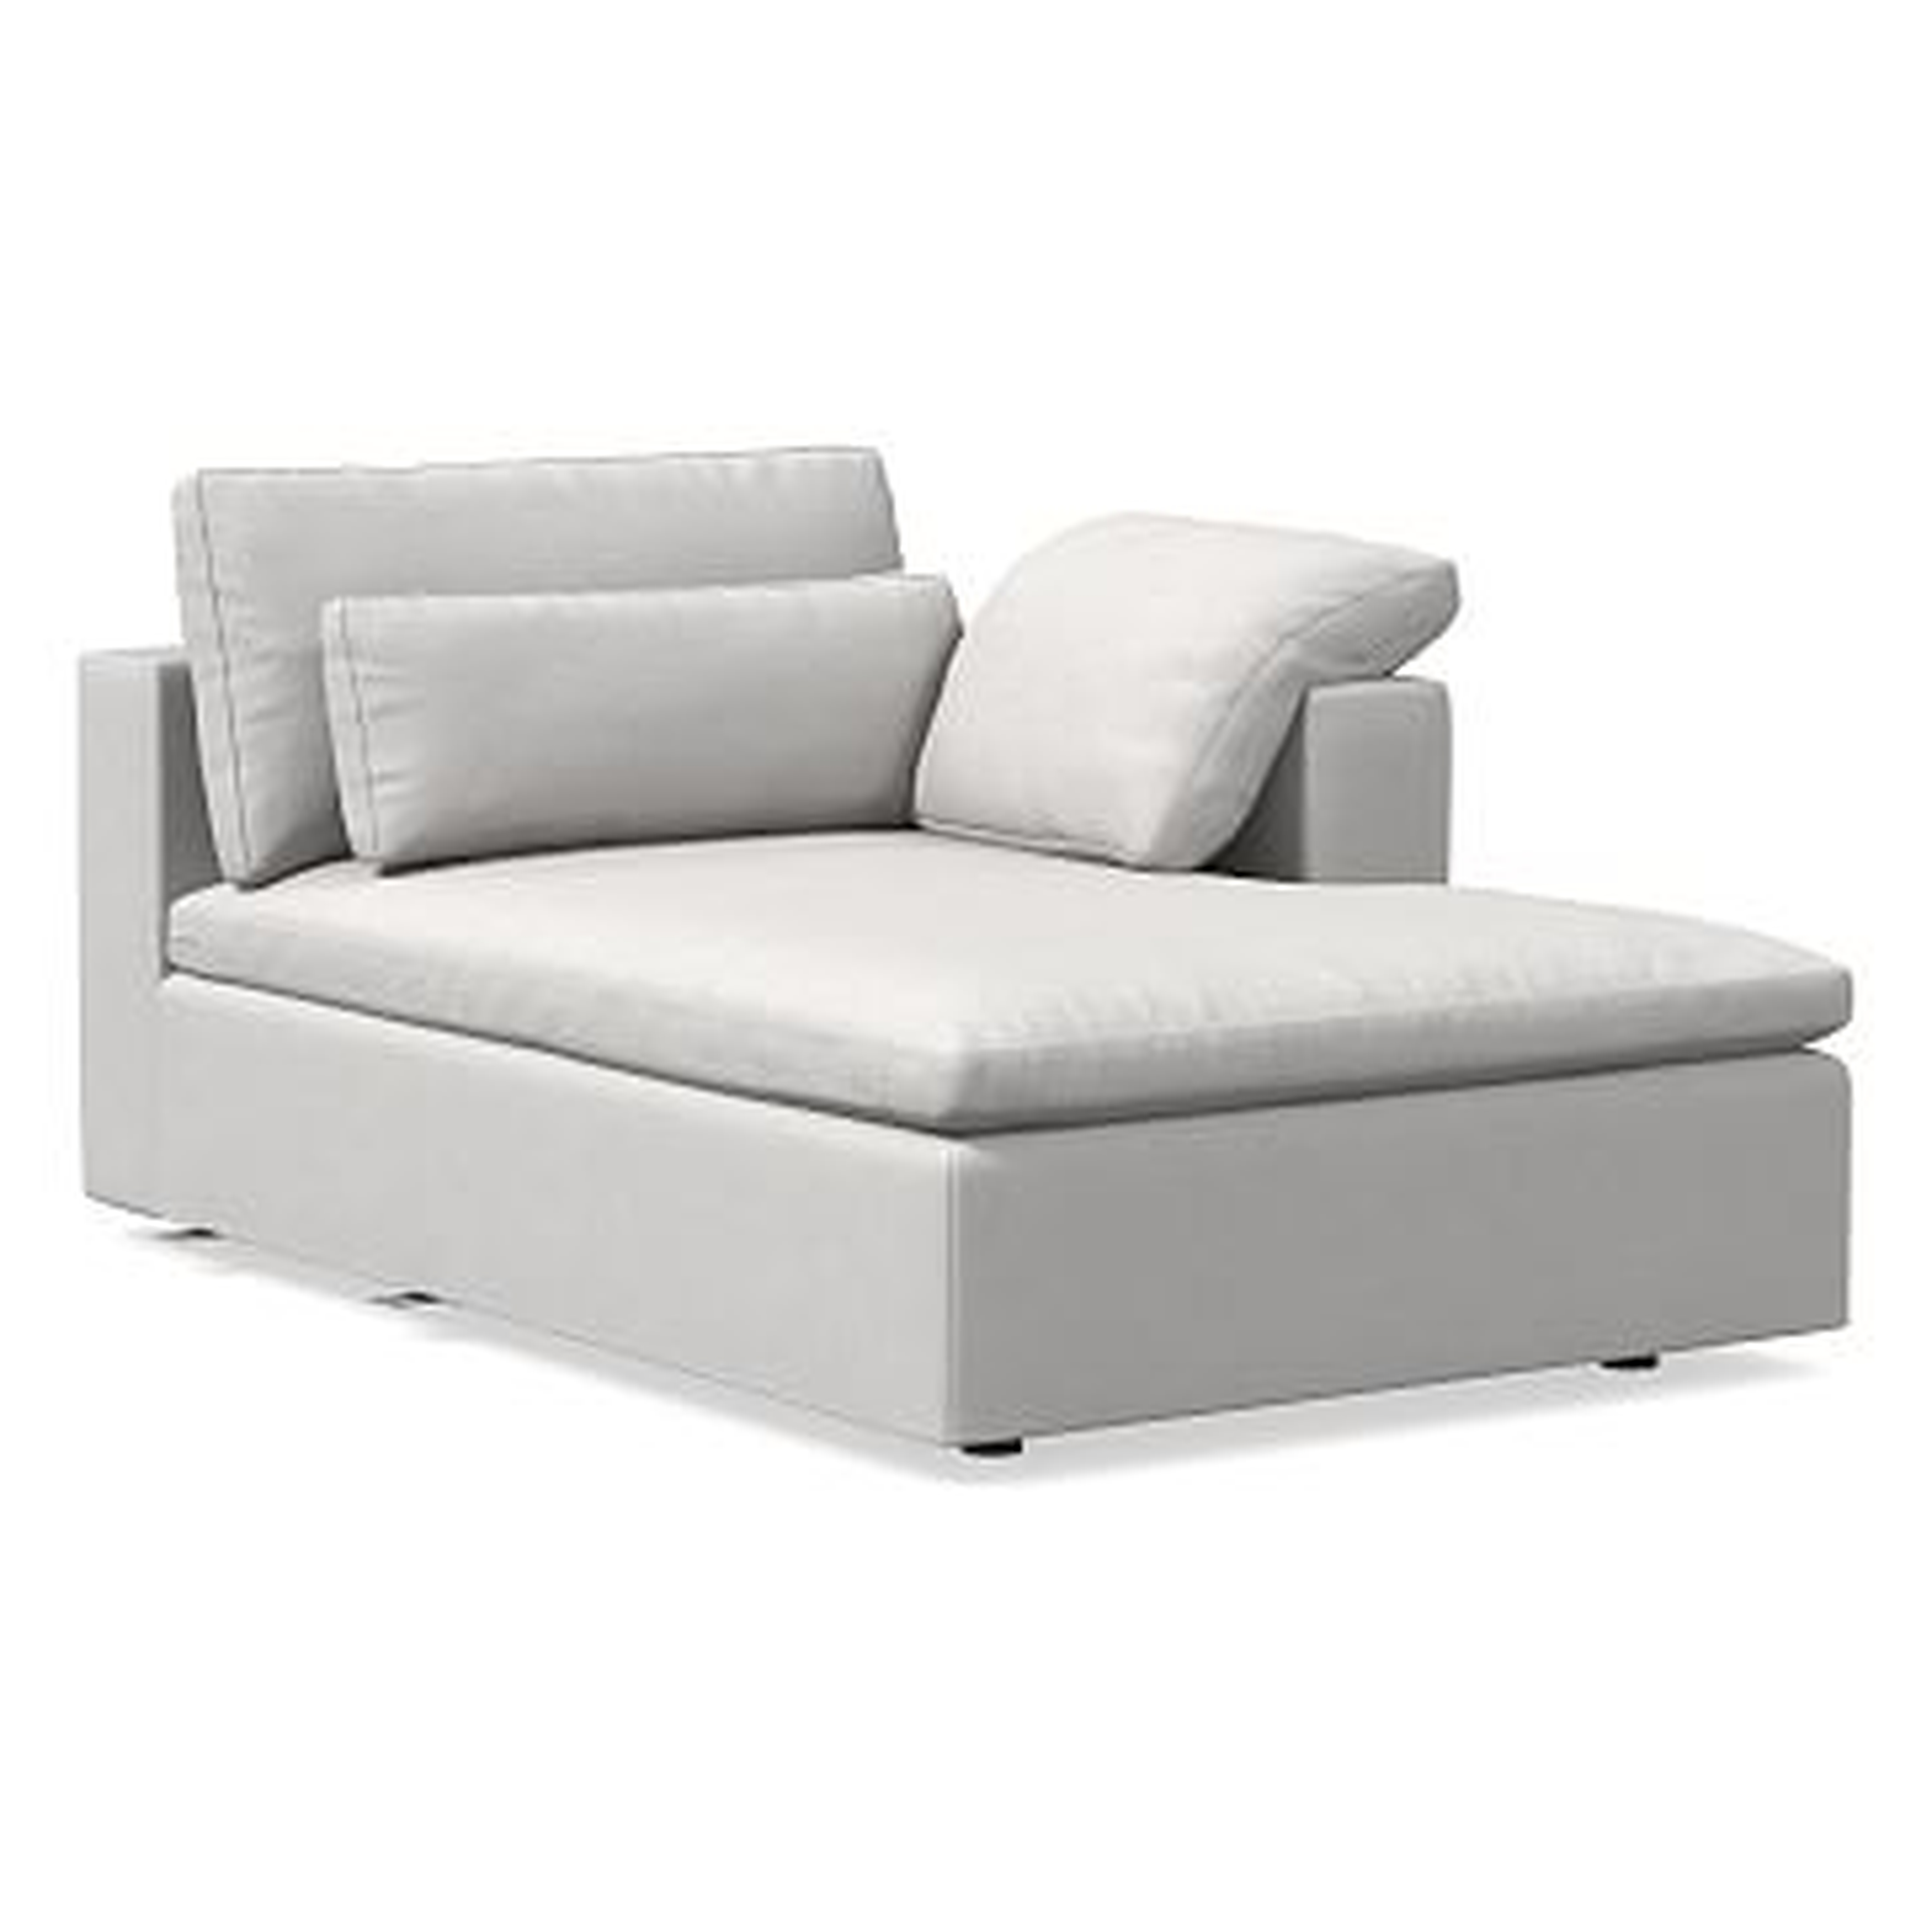 Harmony Modular Right Arm Chaise, Down, Eco Weave, Alabaster, Concealed Supports - West Elm